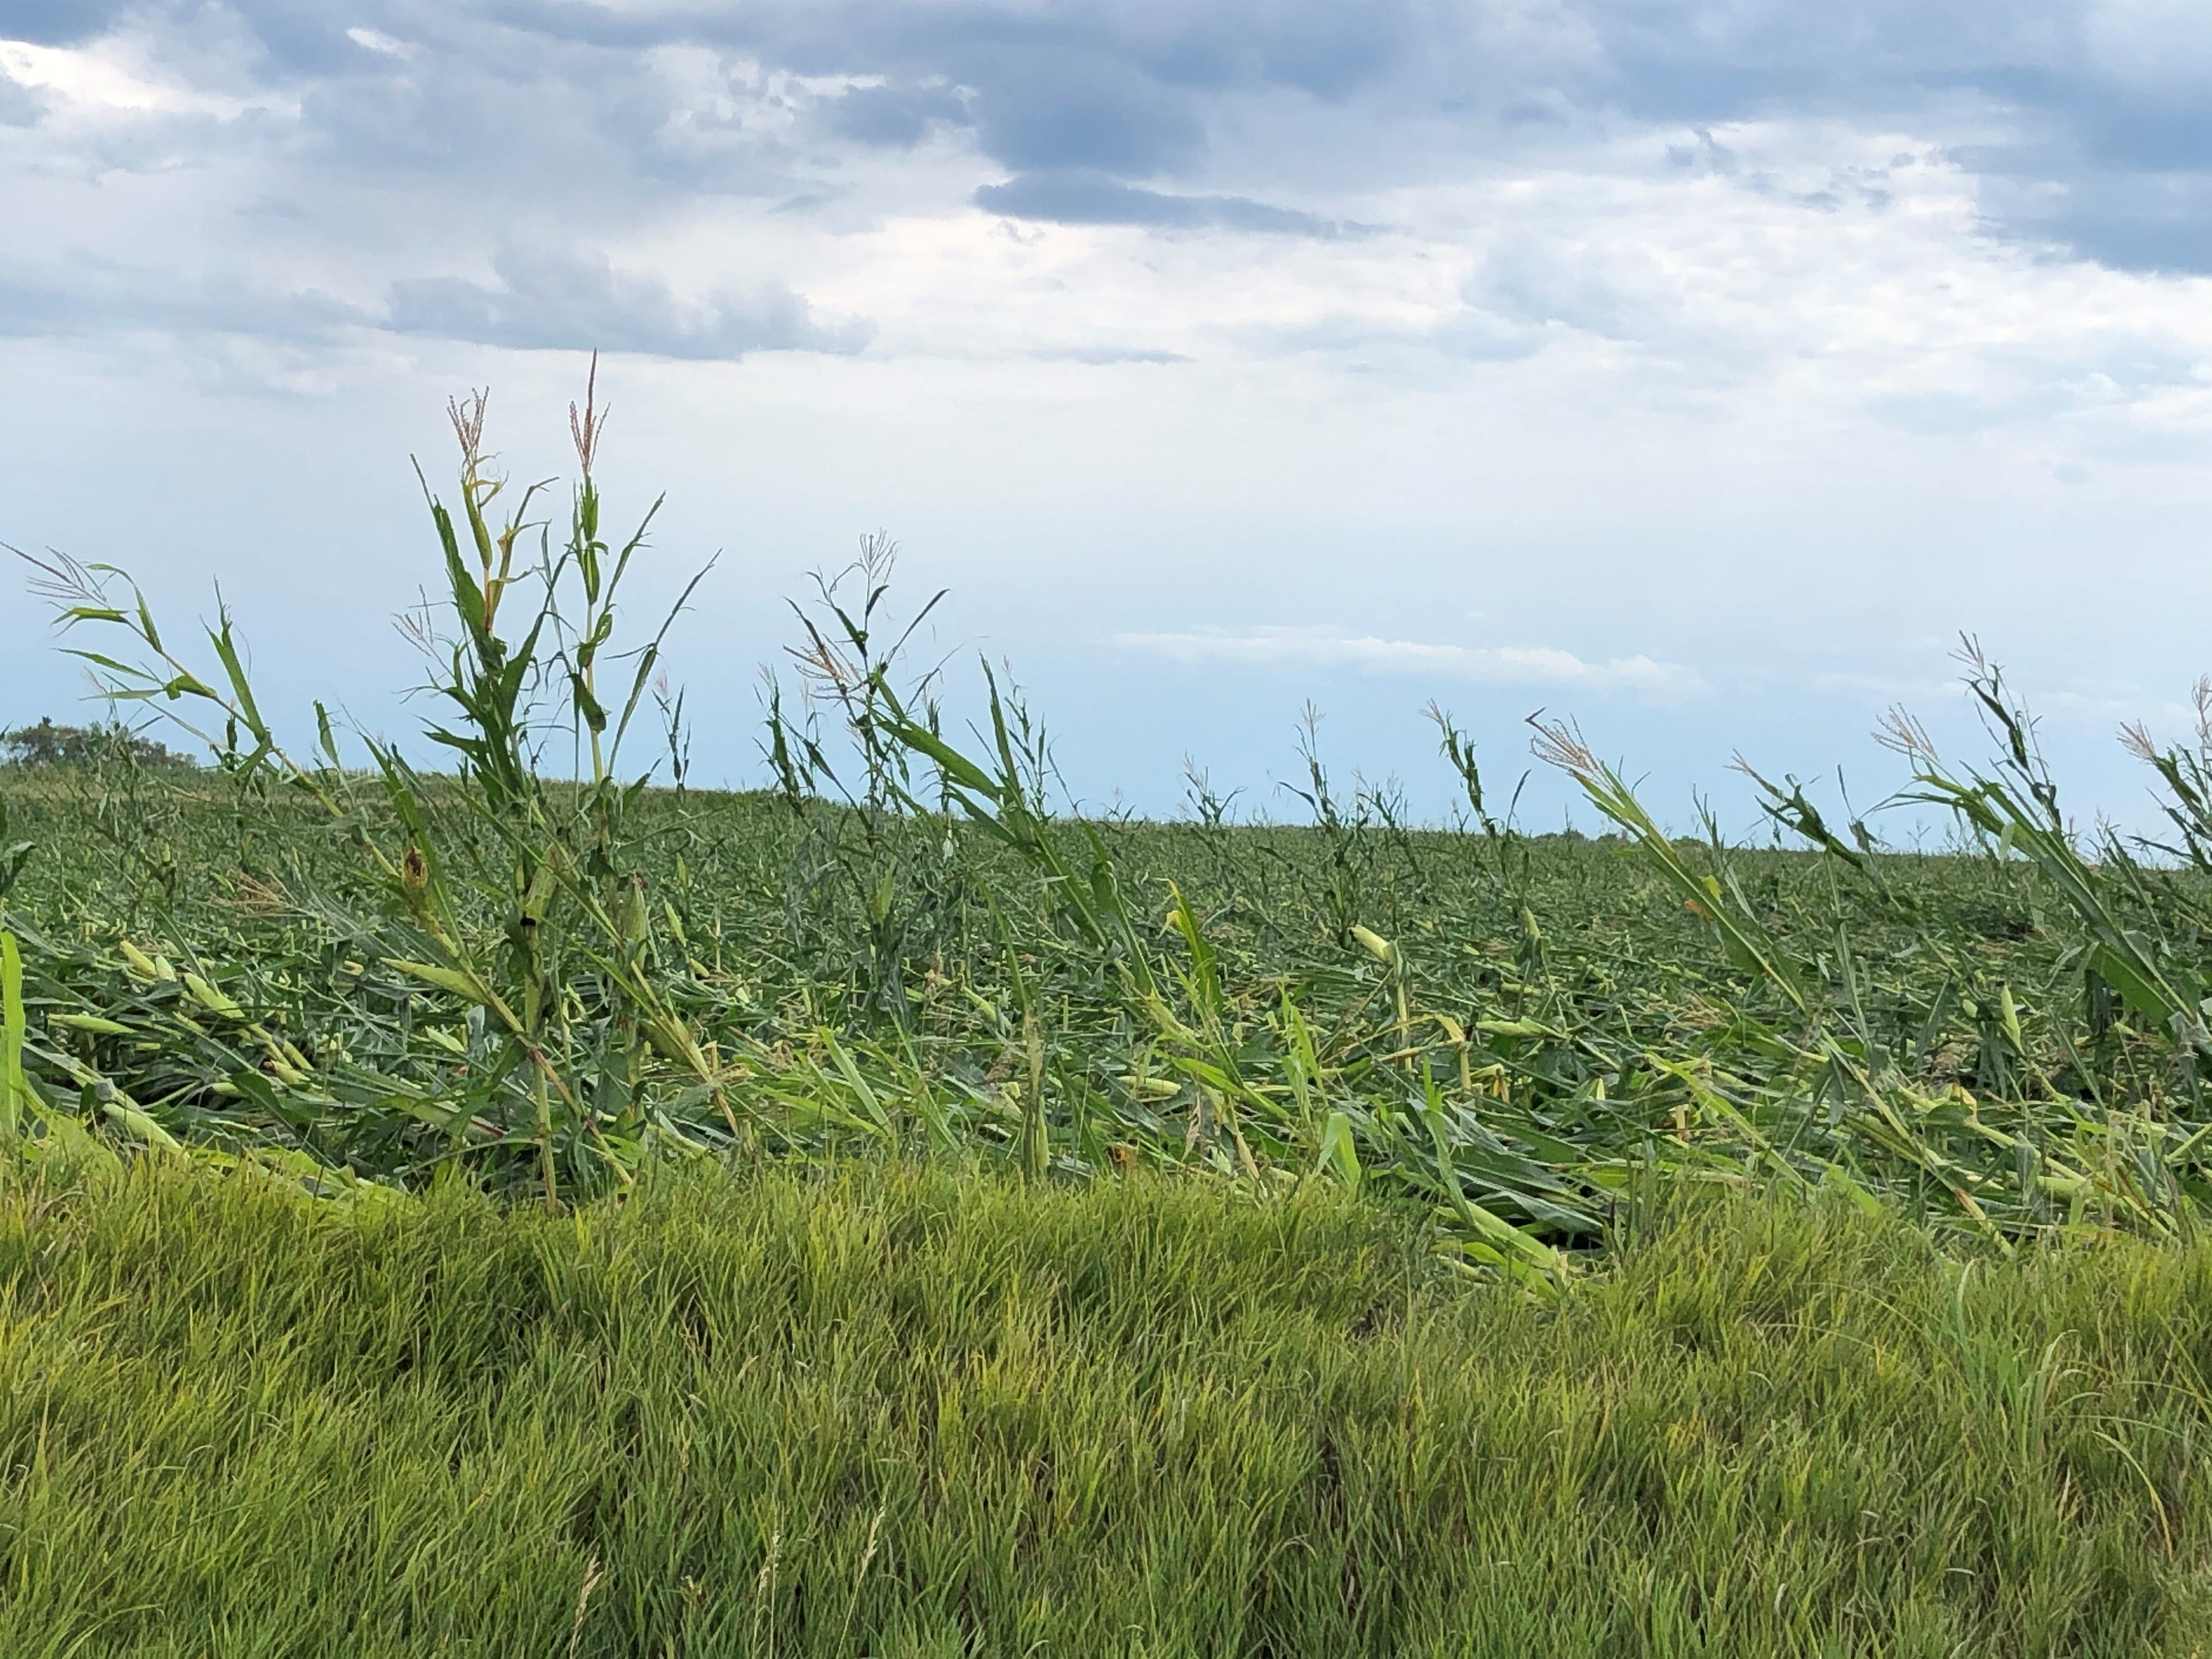 A field of corn in central Iowa flattened by the derecho